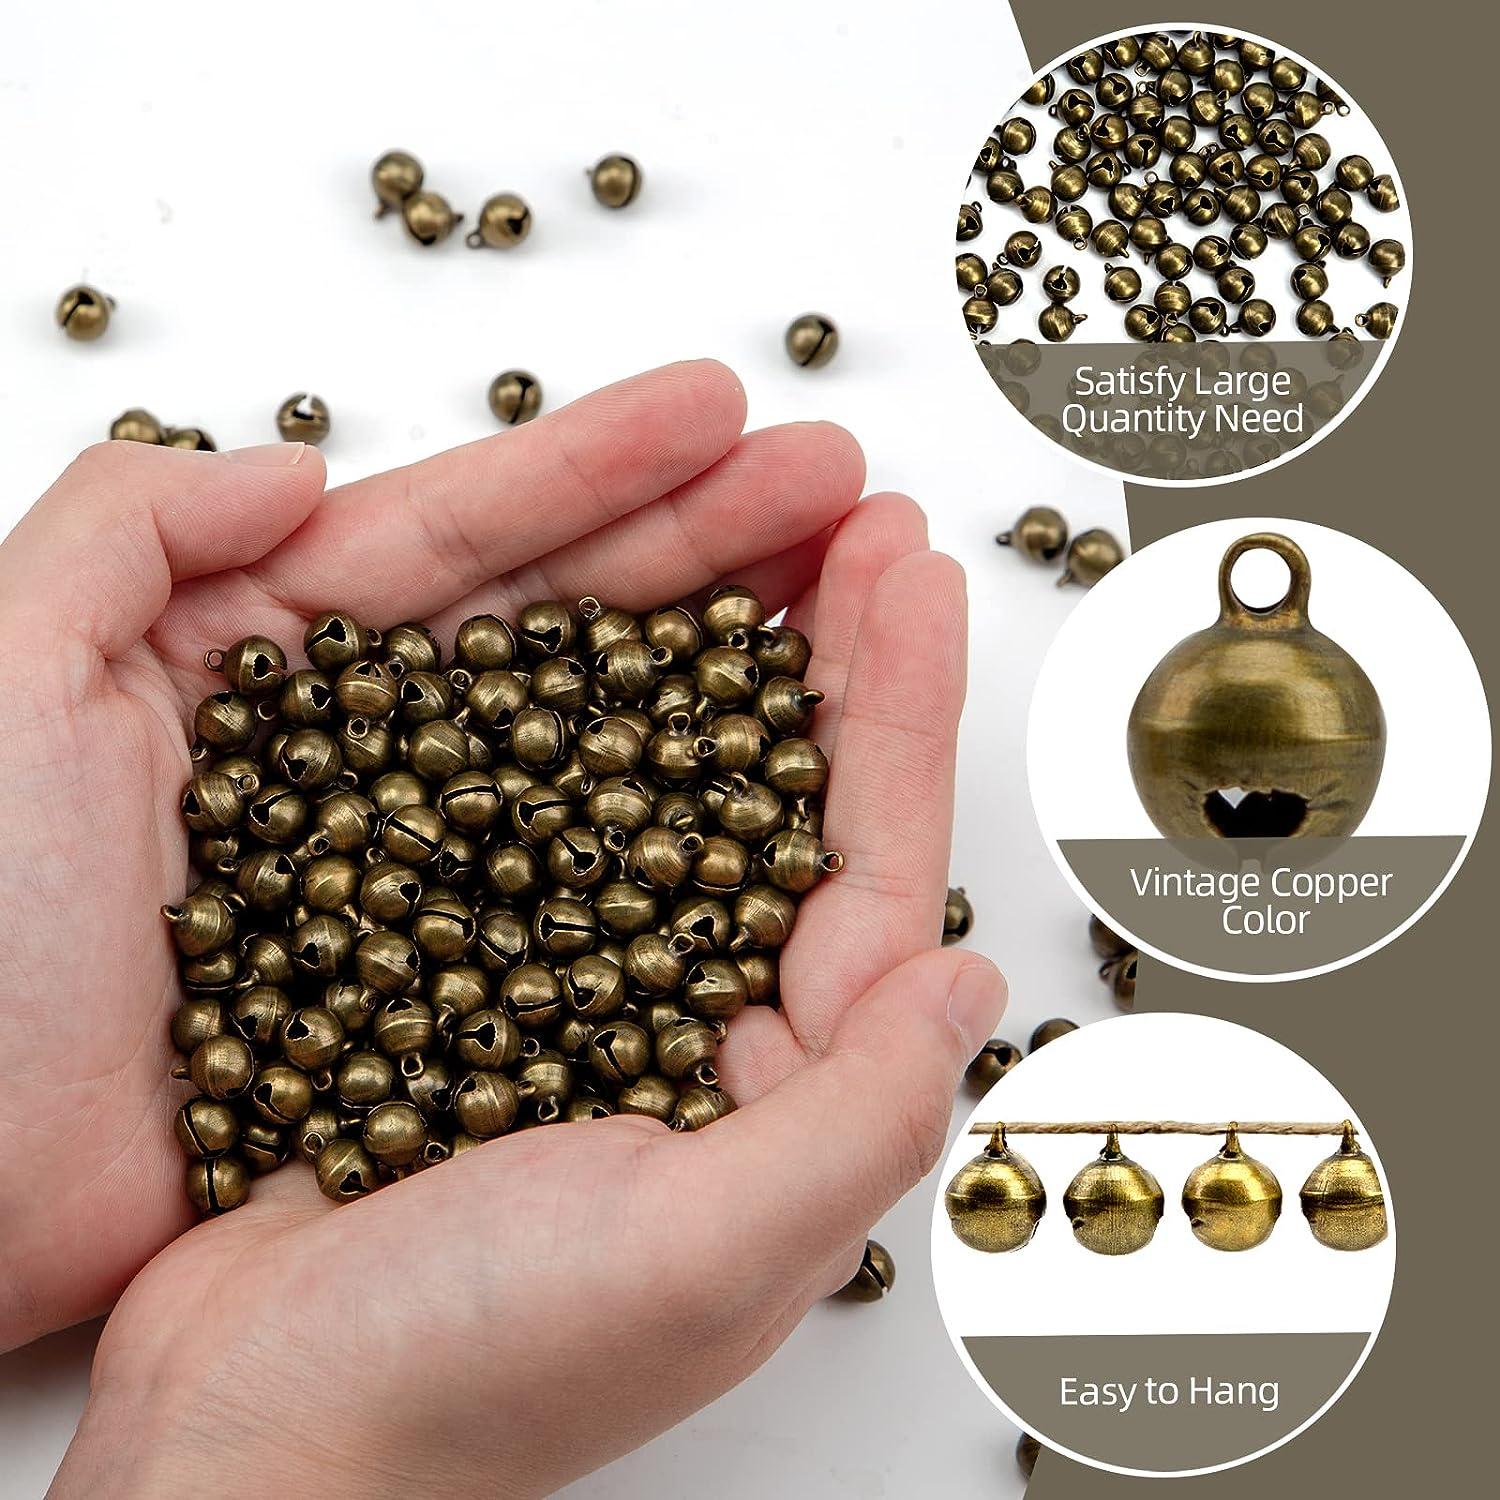 MCPINKY Bronze Jingle Bells, 300PCS Mini Bells 0.3 inches Vintage Bells for  Crafts Anklets Jewelry Findings Sewing Necklace Knitting 300PCS 0.3Inch